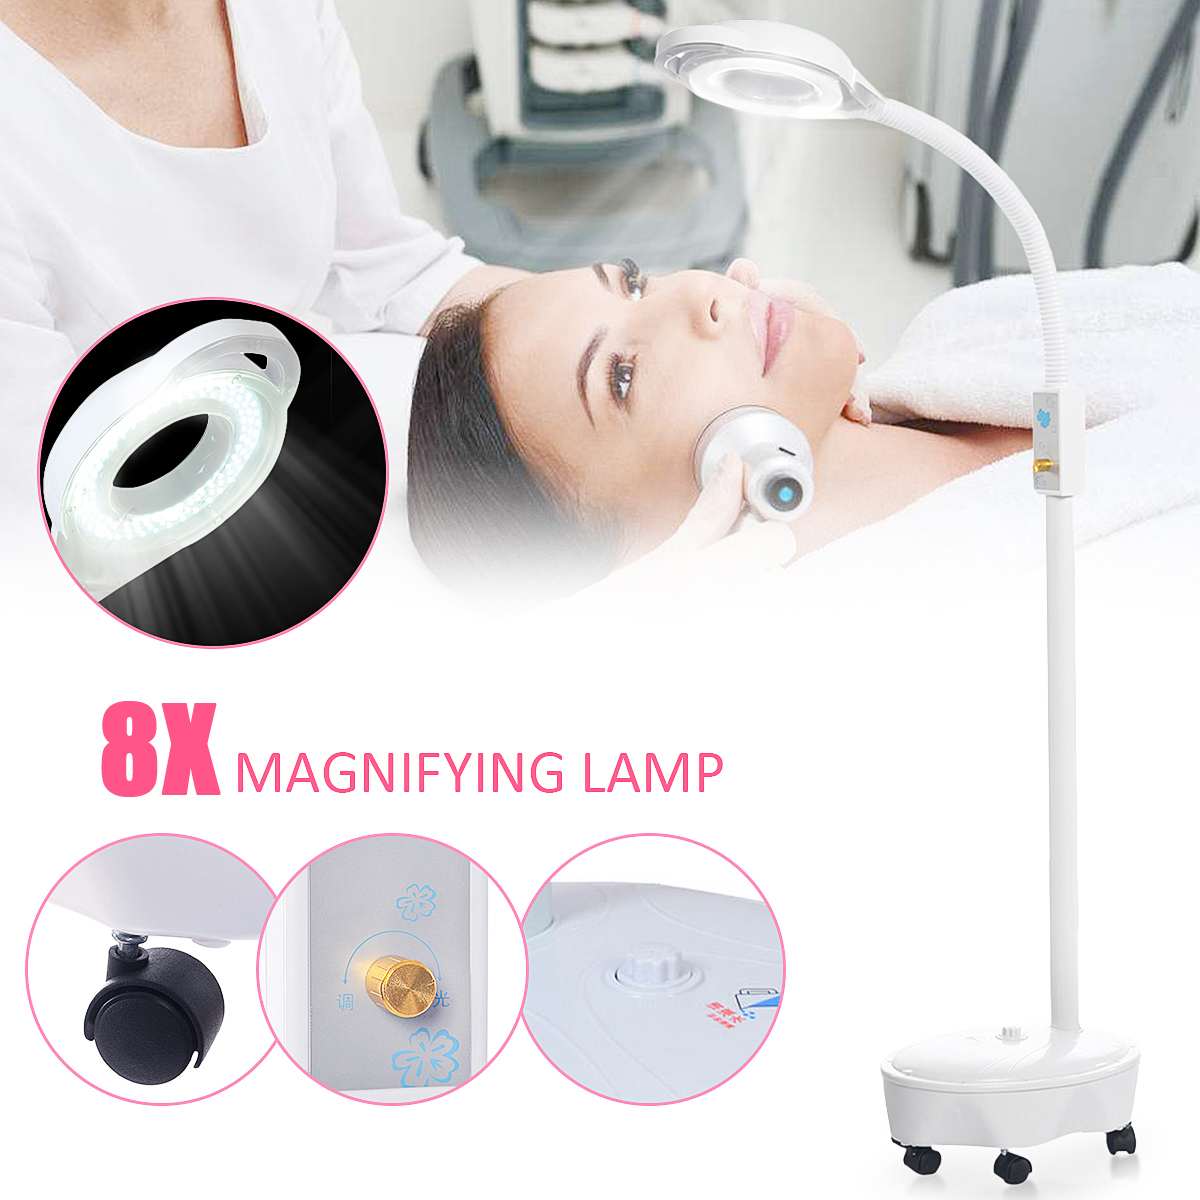 220V-8X-Diopter-120-LED-Magnifying-Floor-Stand-Lamp-Magnifier-Glass-Cold-Ligth-Len-Facial-Light-For--1647042